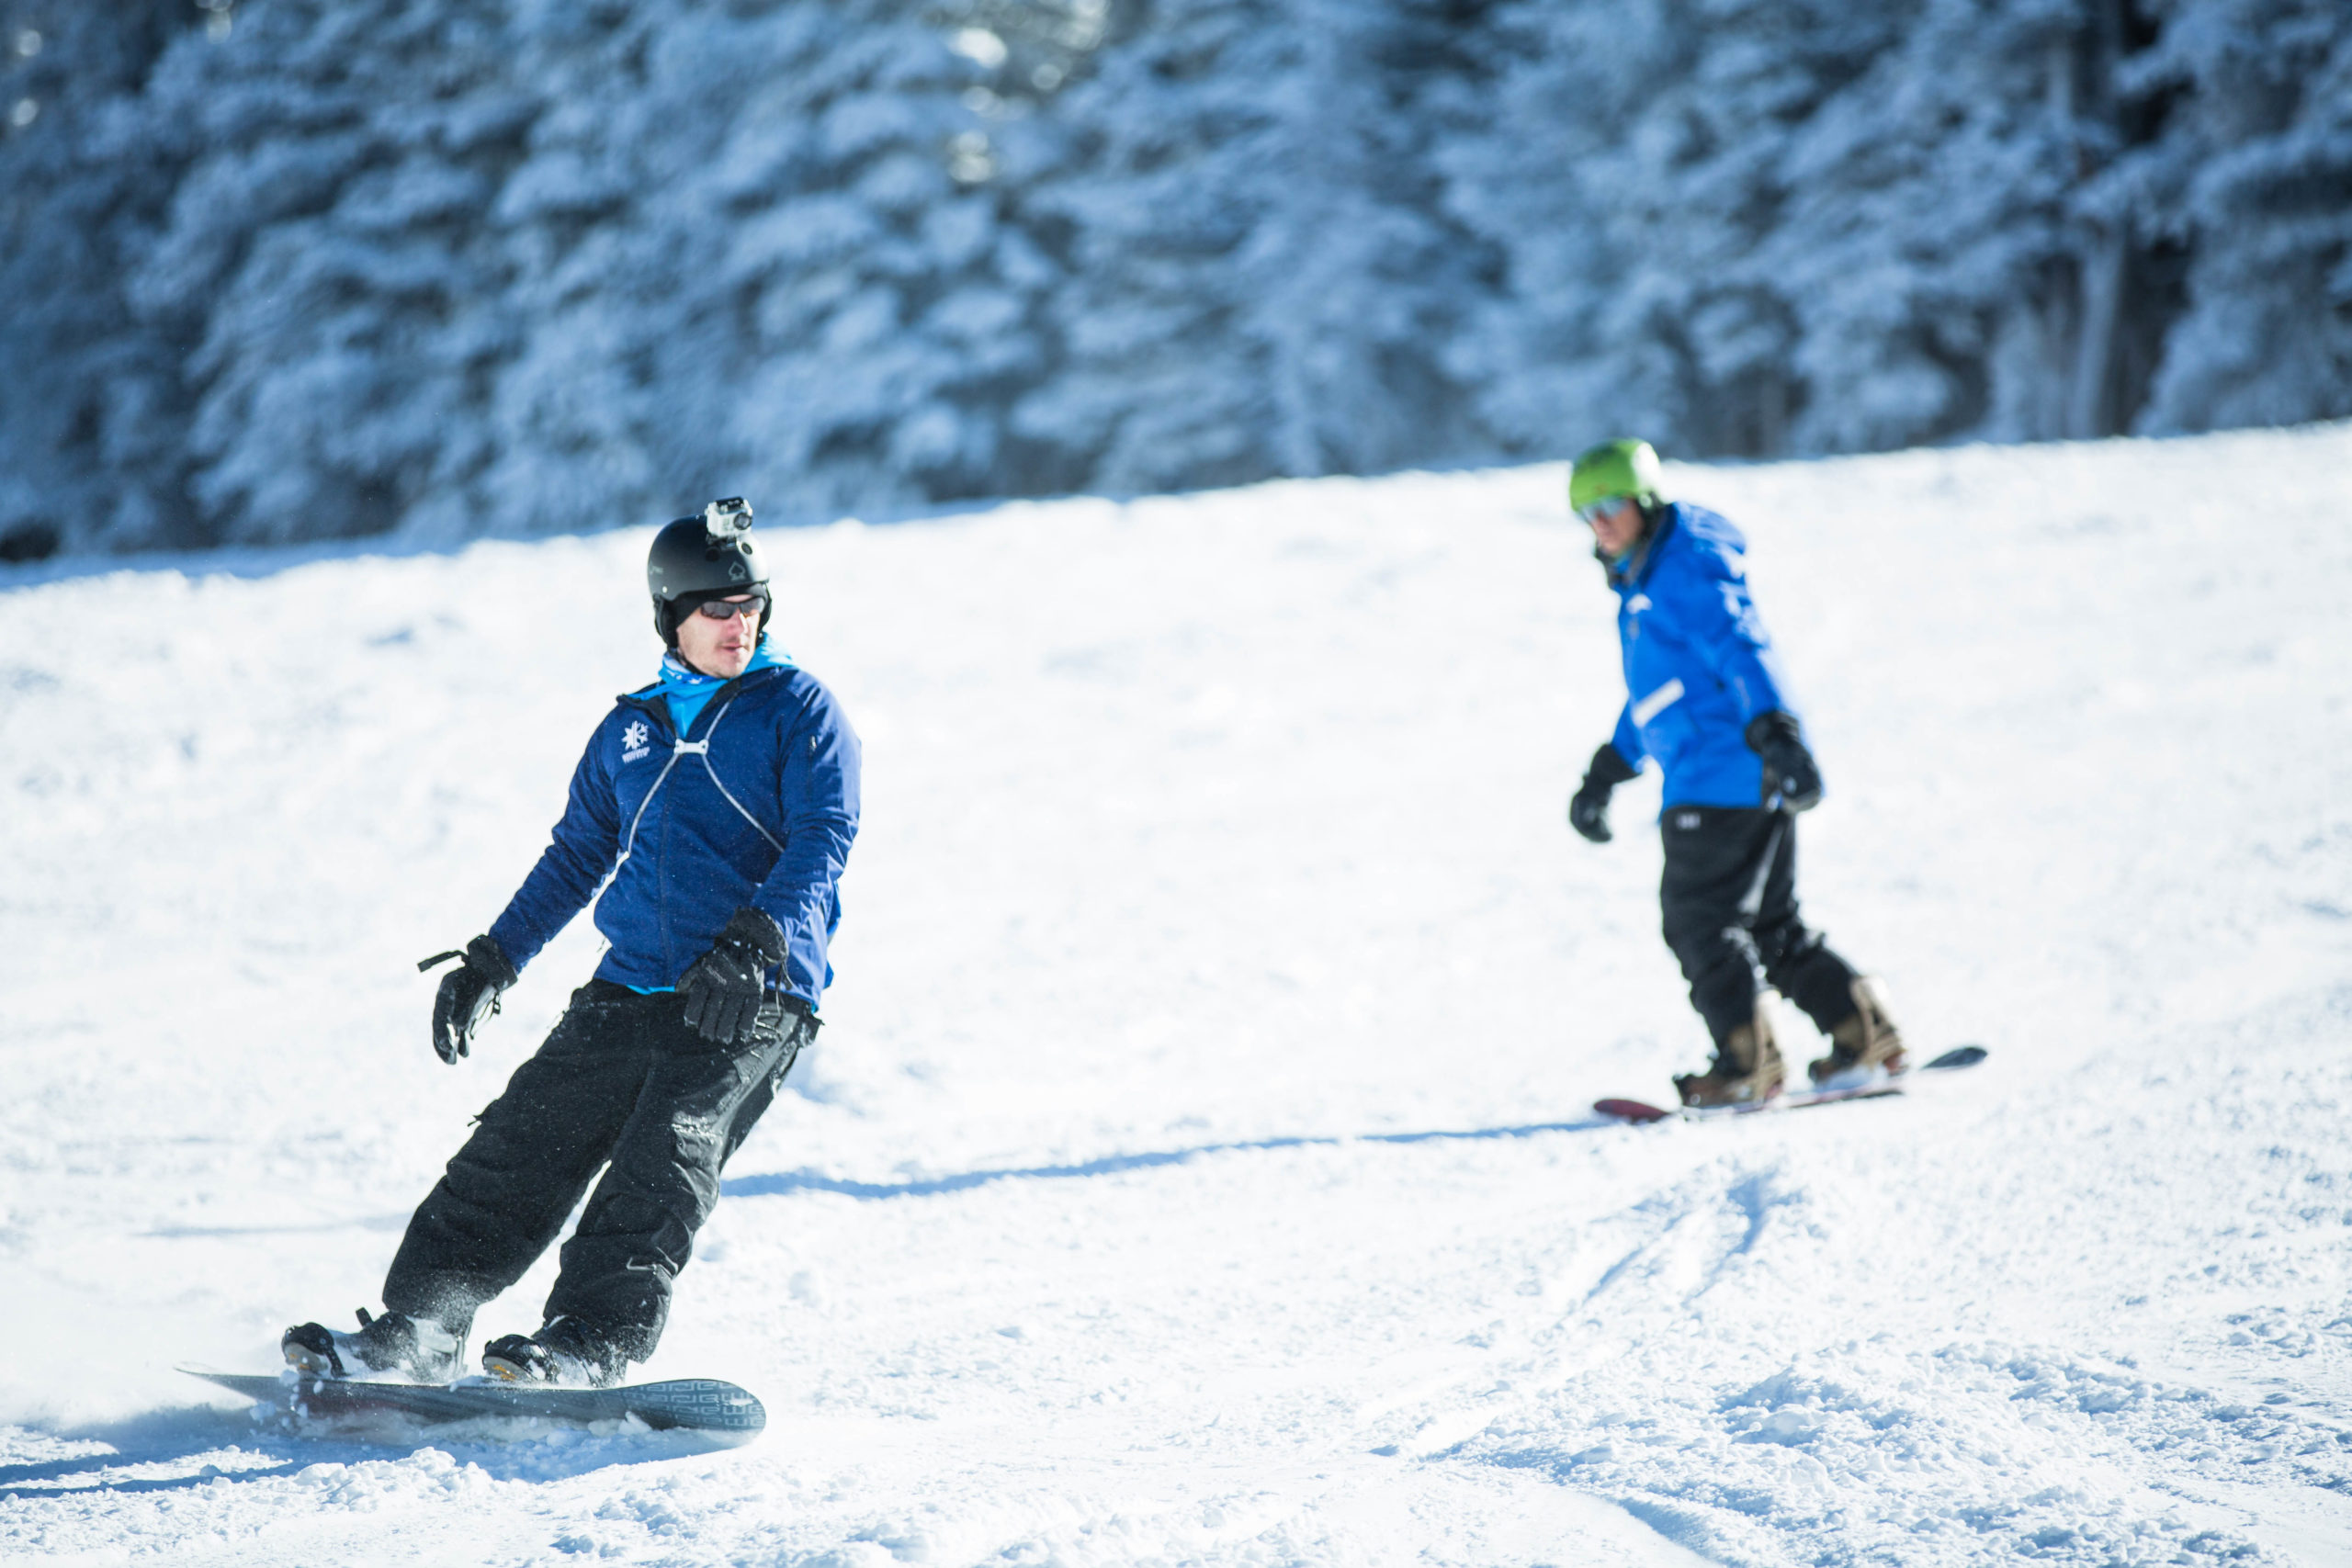 Two snowboarders wearing blue jackets and black pants snowboarding